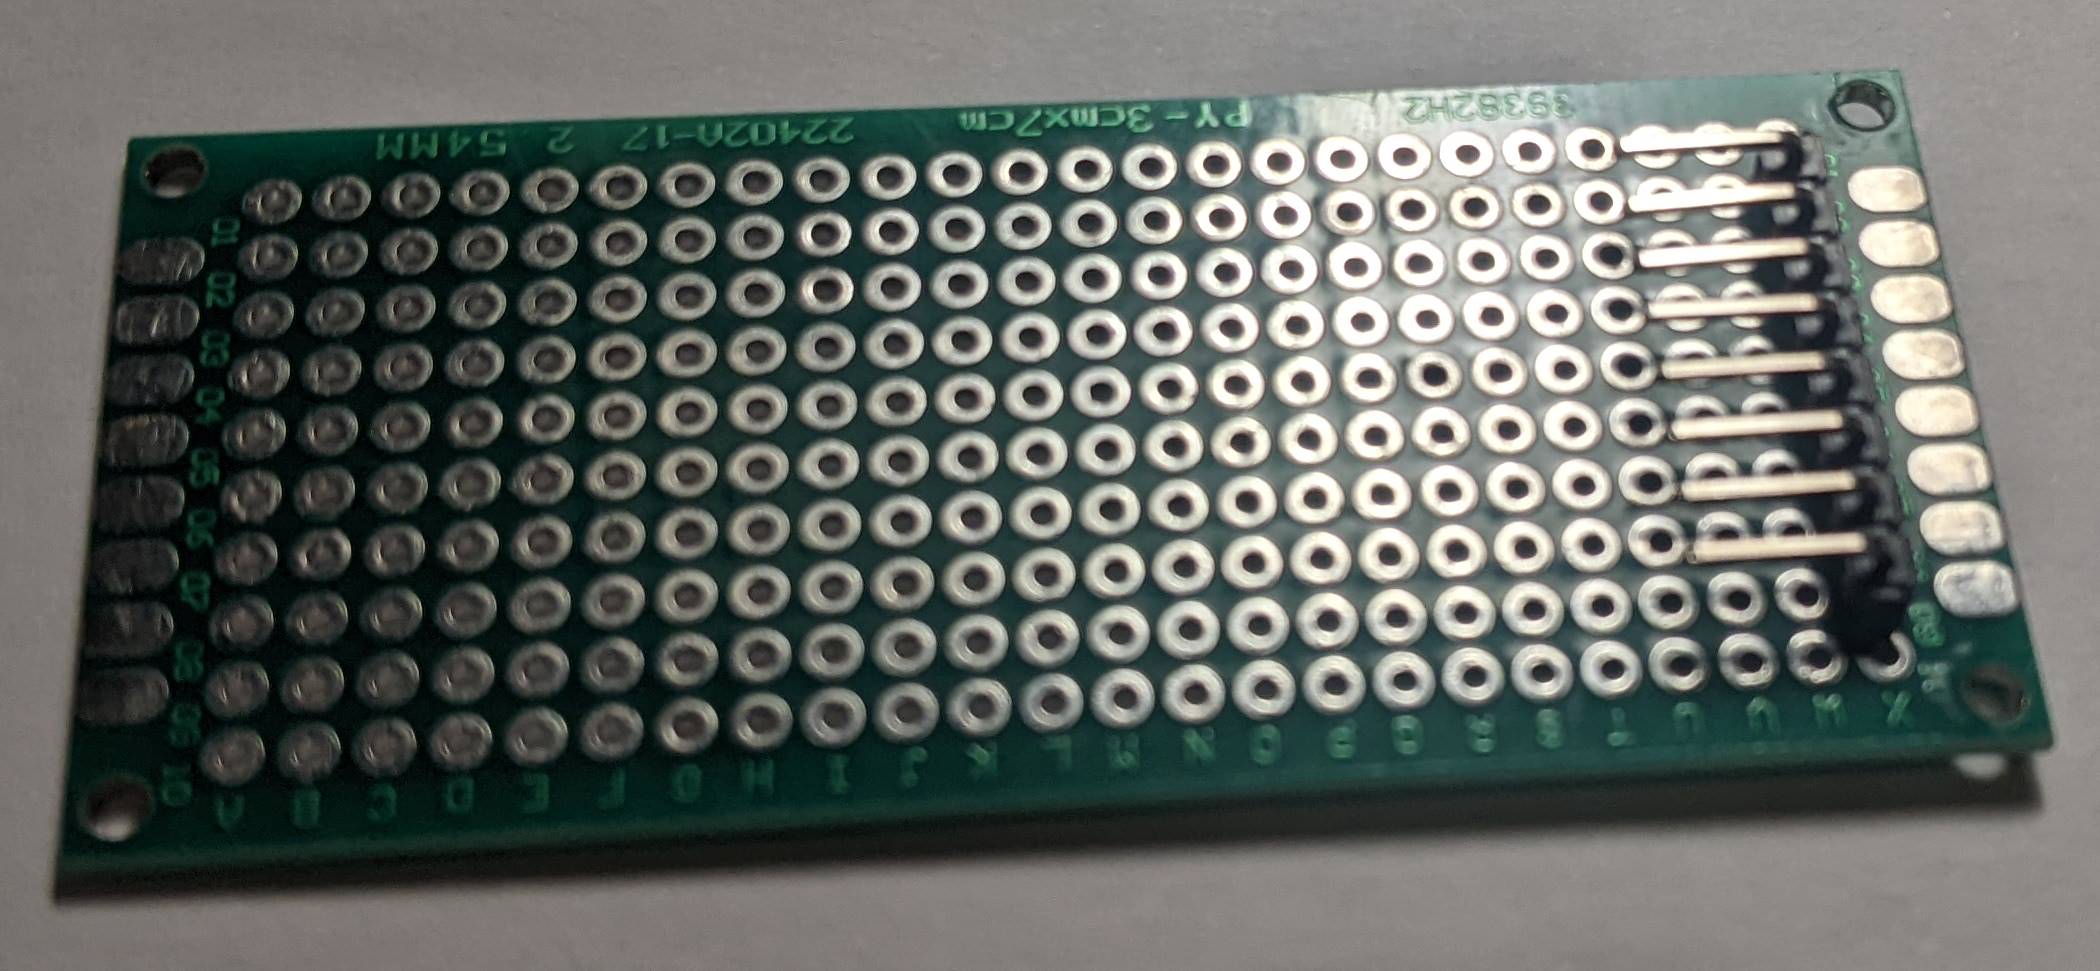 PCB after step 1 has been completed